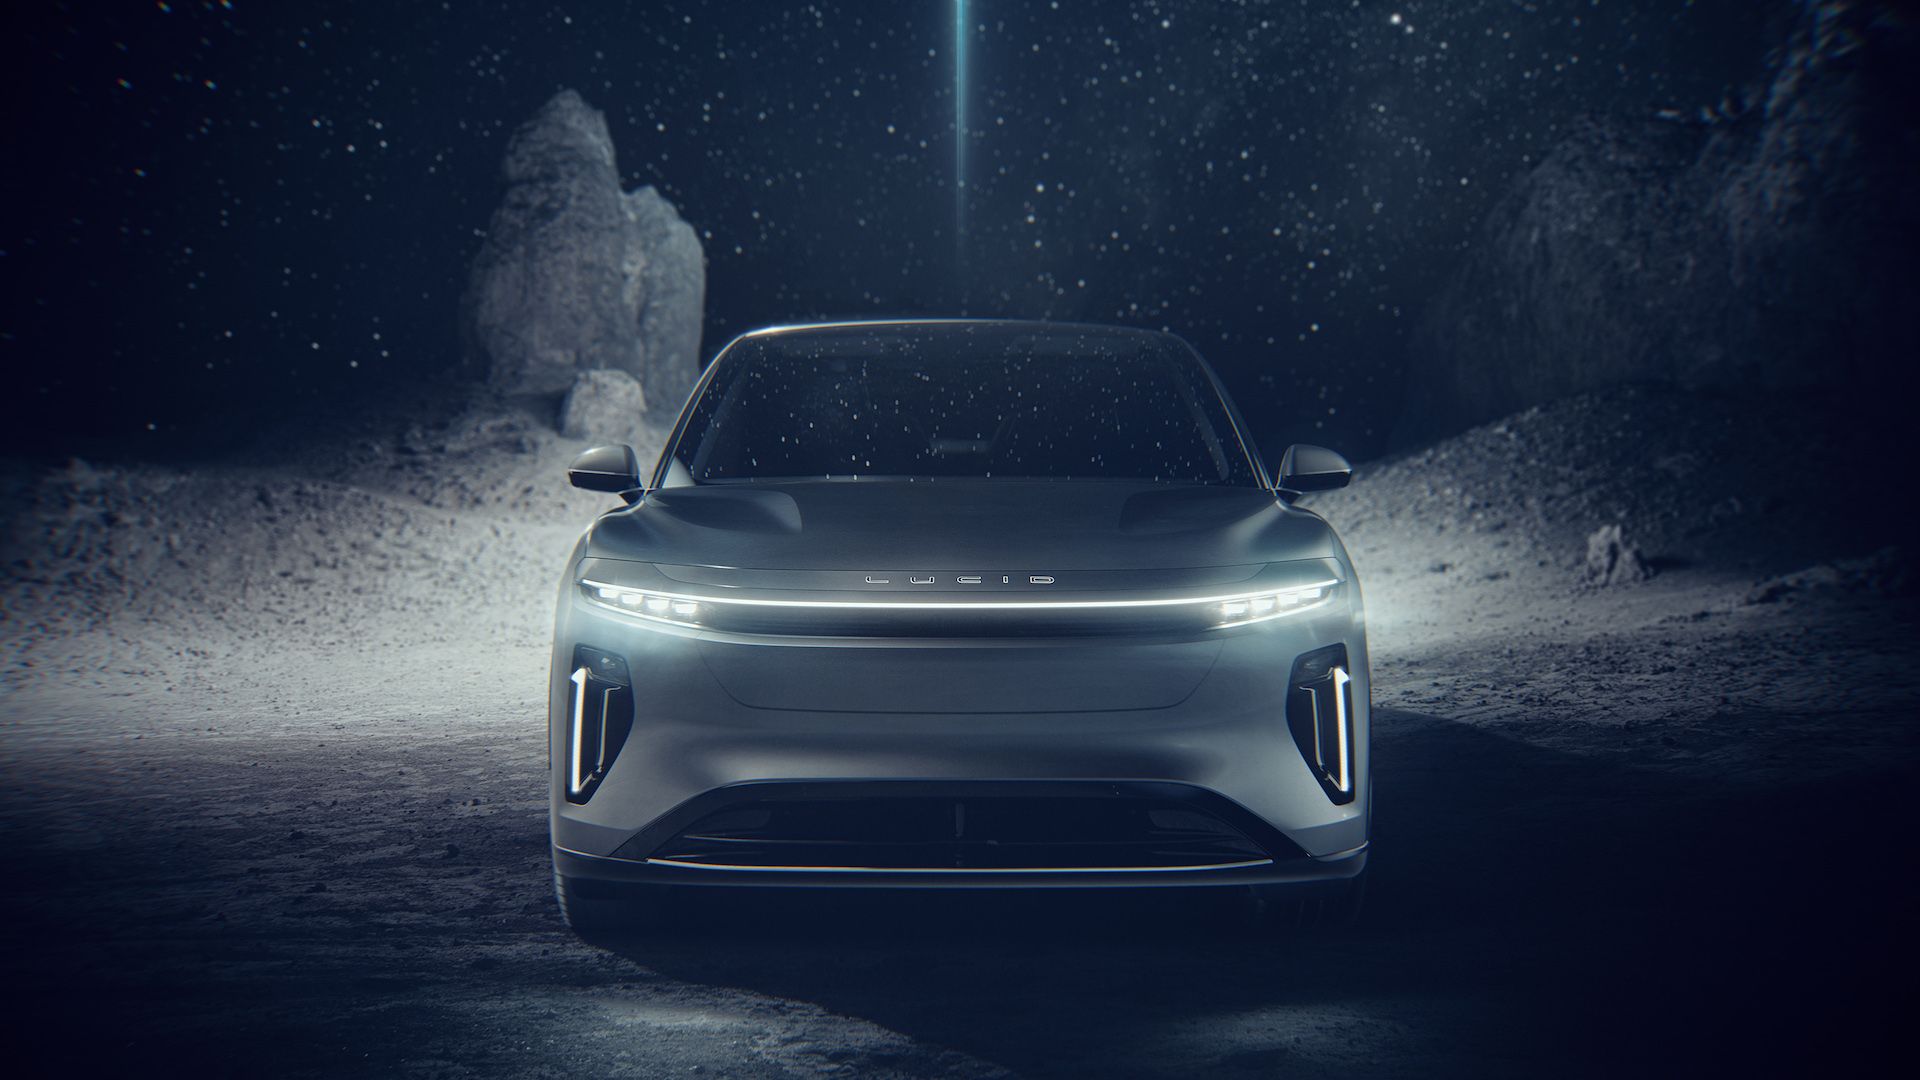 Image of the upcoming Lucid Gravity electric SUV